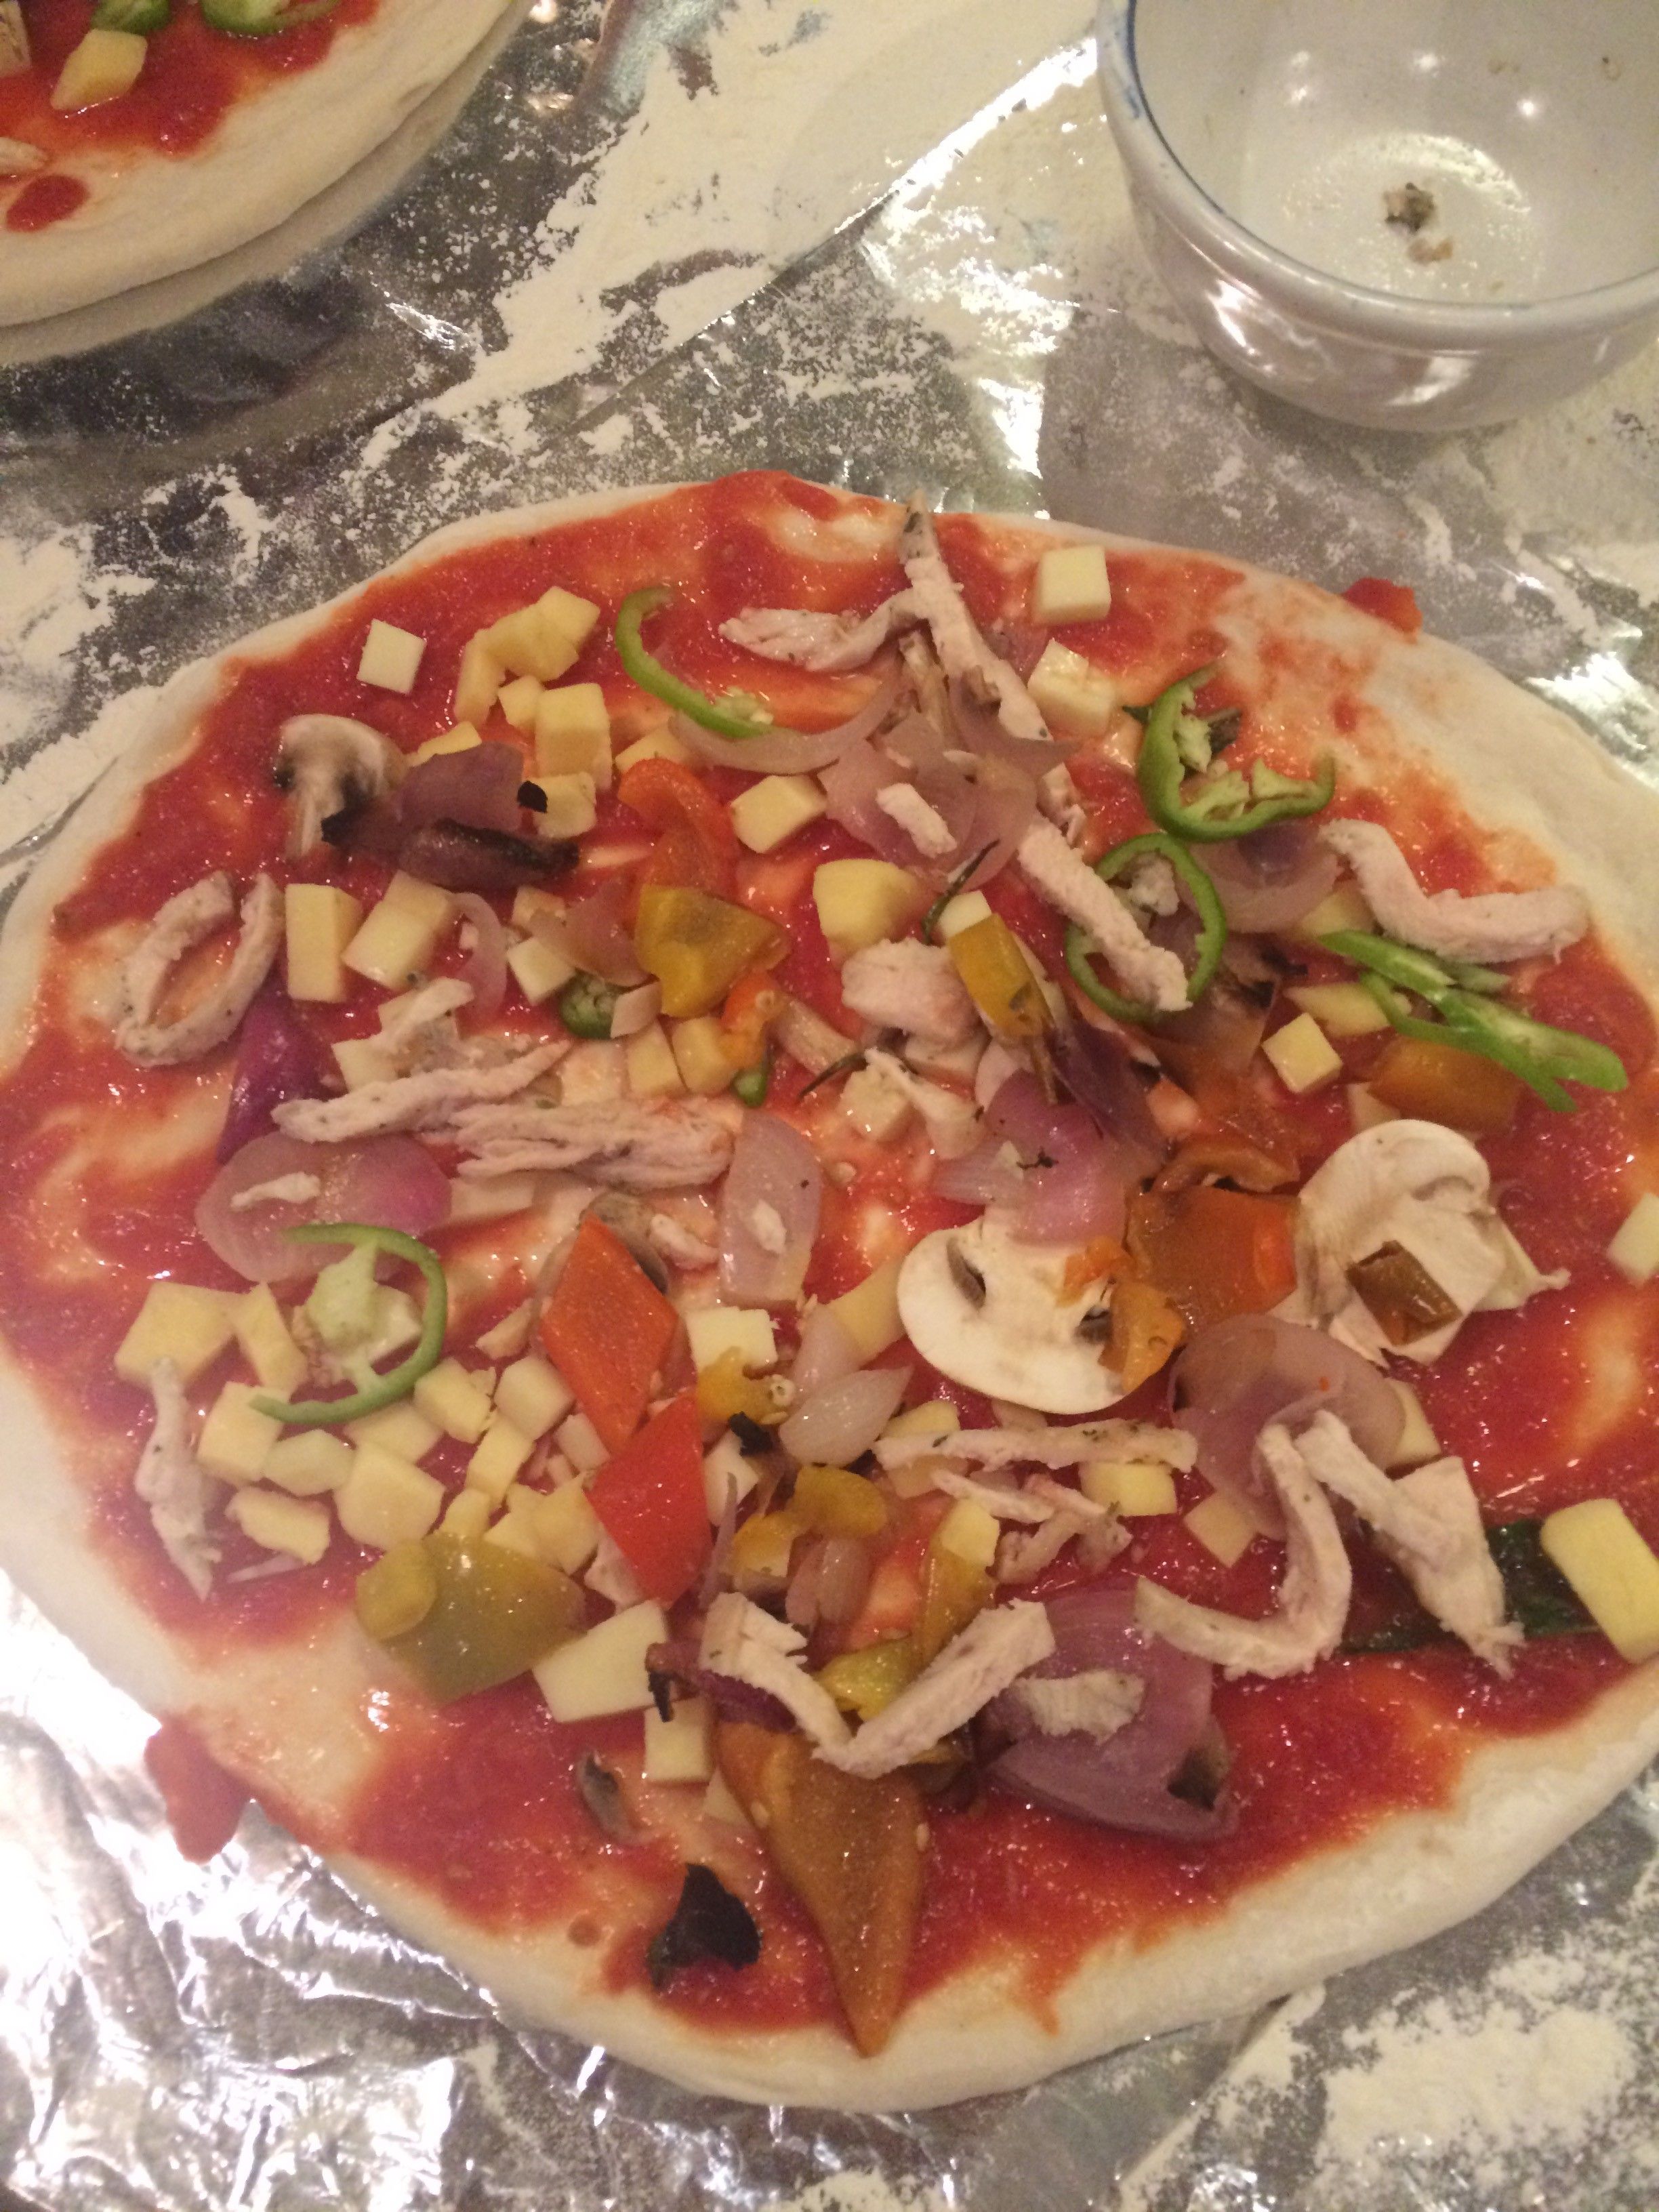 My pizza with extra toppings